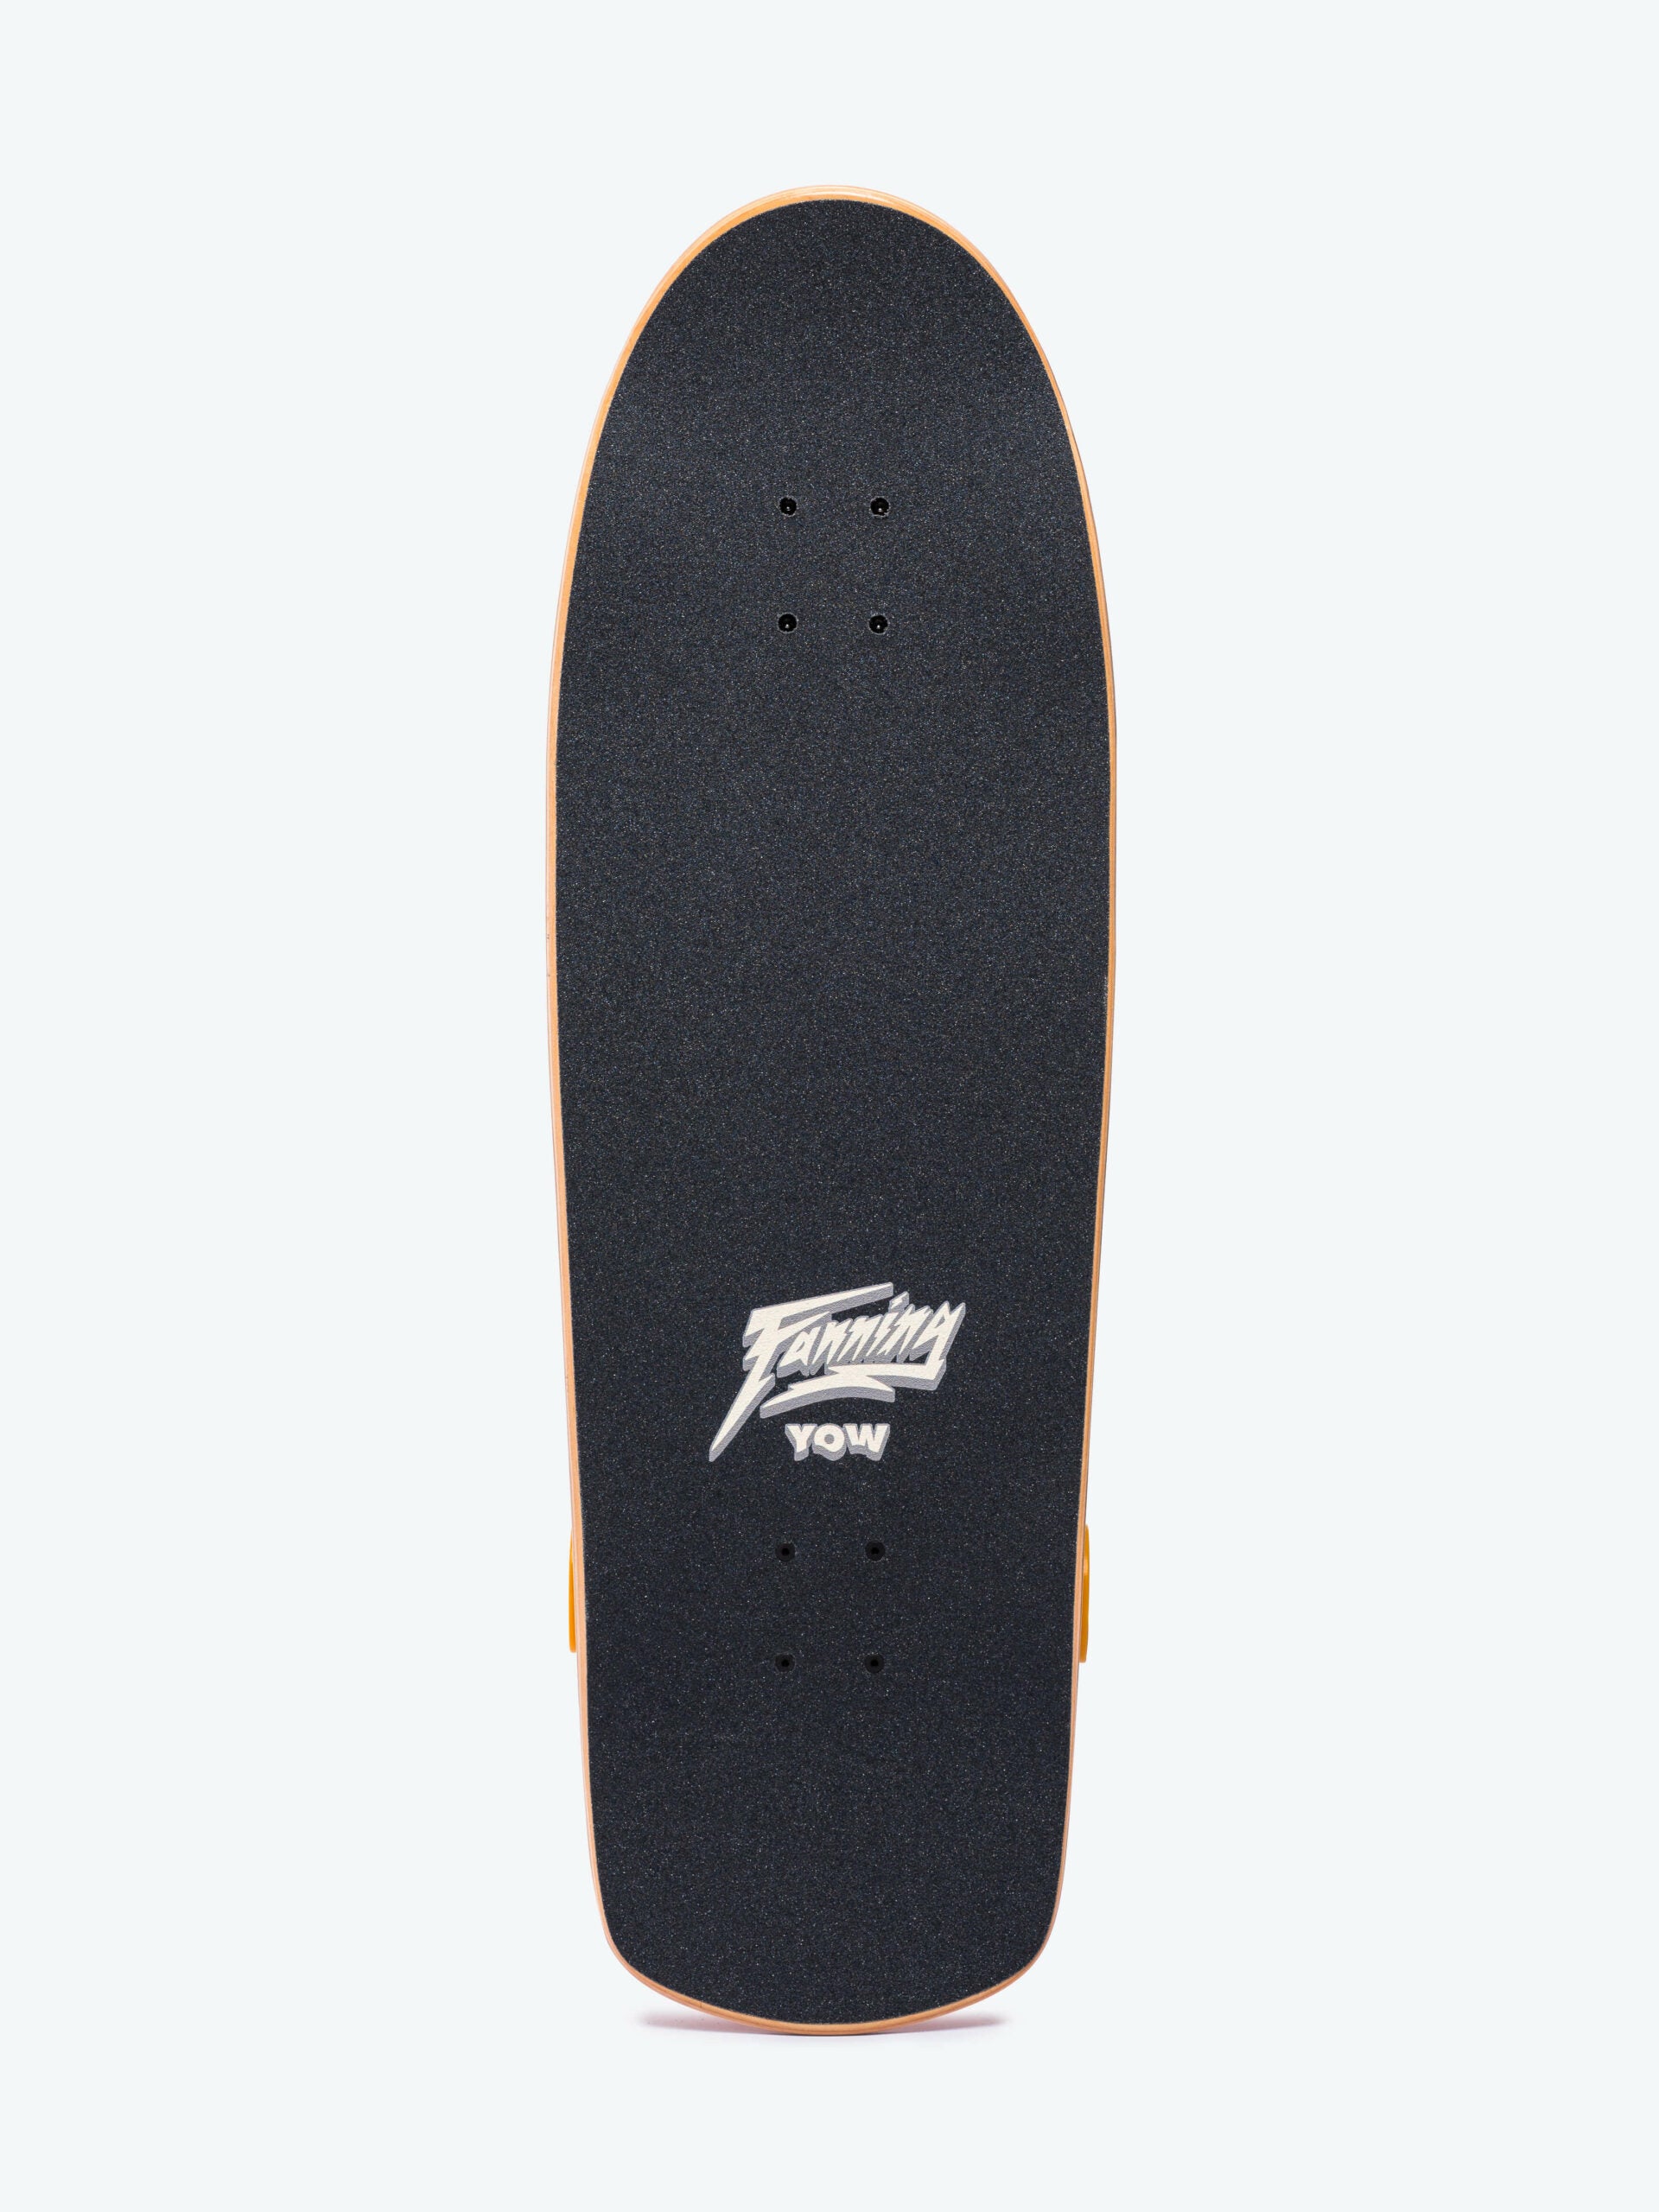 Surfskate Fanning Falcon Performer 33.5" Signature Series Yow